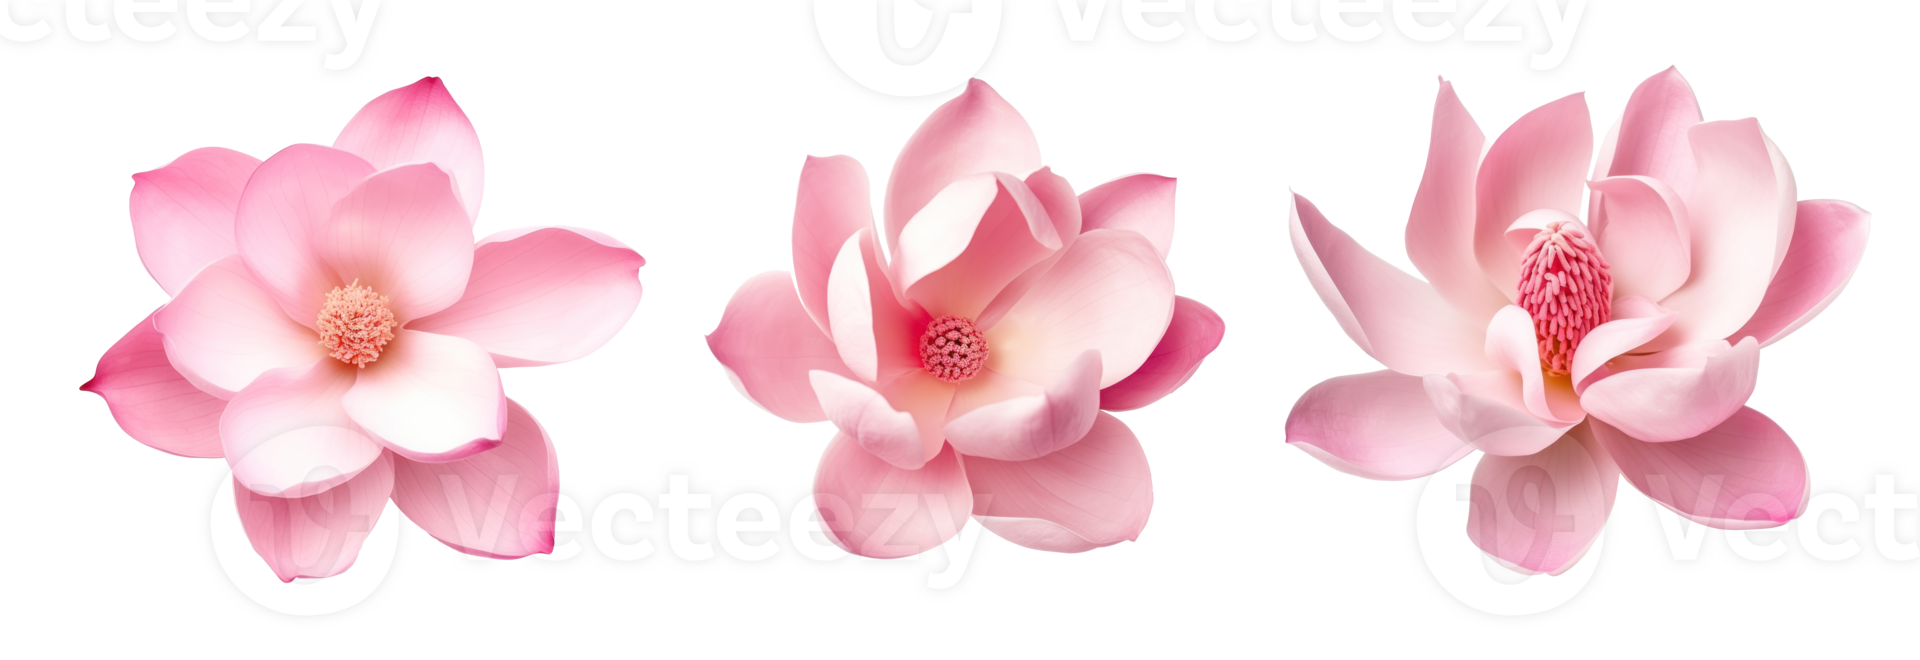 Rosa Magnolie Blume isoliert png